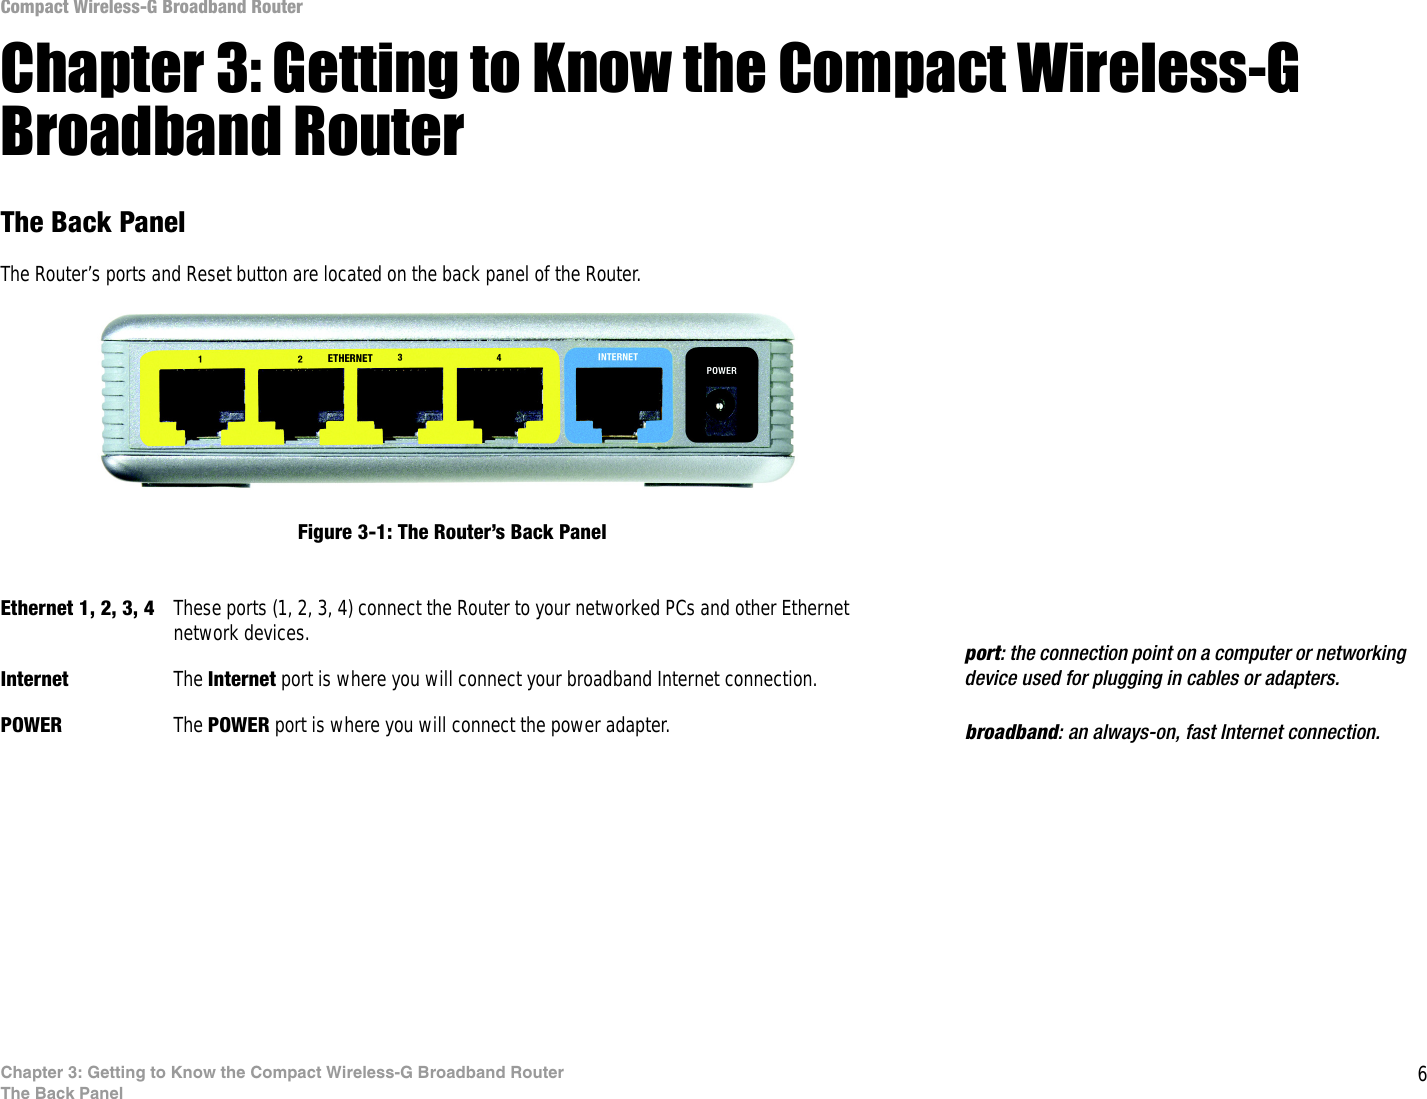 6Chapter 3: Getting to Know the Compact Wireless-G Broadband RouterThe Back PanelCompact Wireless-G Broadband RouterChapter 3: Getting to Know the Compact Wireless-G Broadband RouterThe Back PanelThe Router’s ports and Reset button are located on the back panel of the Router.Ethernet 1, 2, 3, 4 These ports (1, 2, 3, 4) connect the Router to your networked PCs and other Ethernet network devices.Internet The Internet port is where you will connect your broadband Internet connection.POWER The POWER port is where you will connect the power adapter.Figure 3-1: The Router’s Back Panelbroadband: an always-on, fast Internet connection.port: the connection point on a computer or networking device used for plugging in cables or adapters.